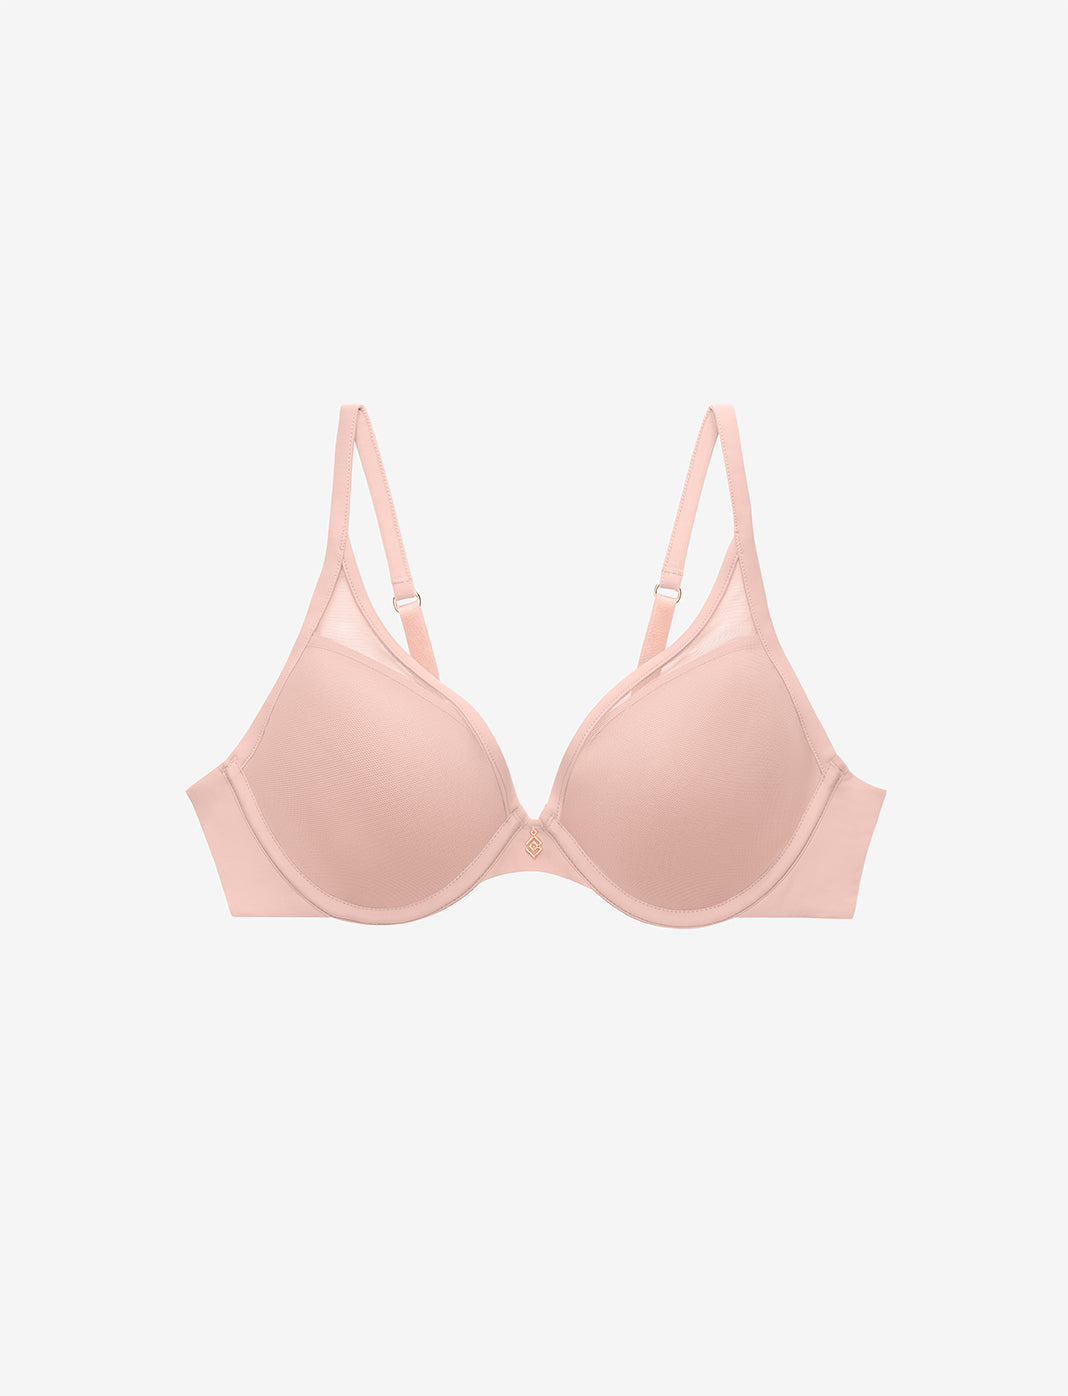 Shop Bras for Asymmetrical Breasts - Best Bras for Uneven or Different  Sized Breasts